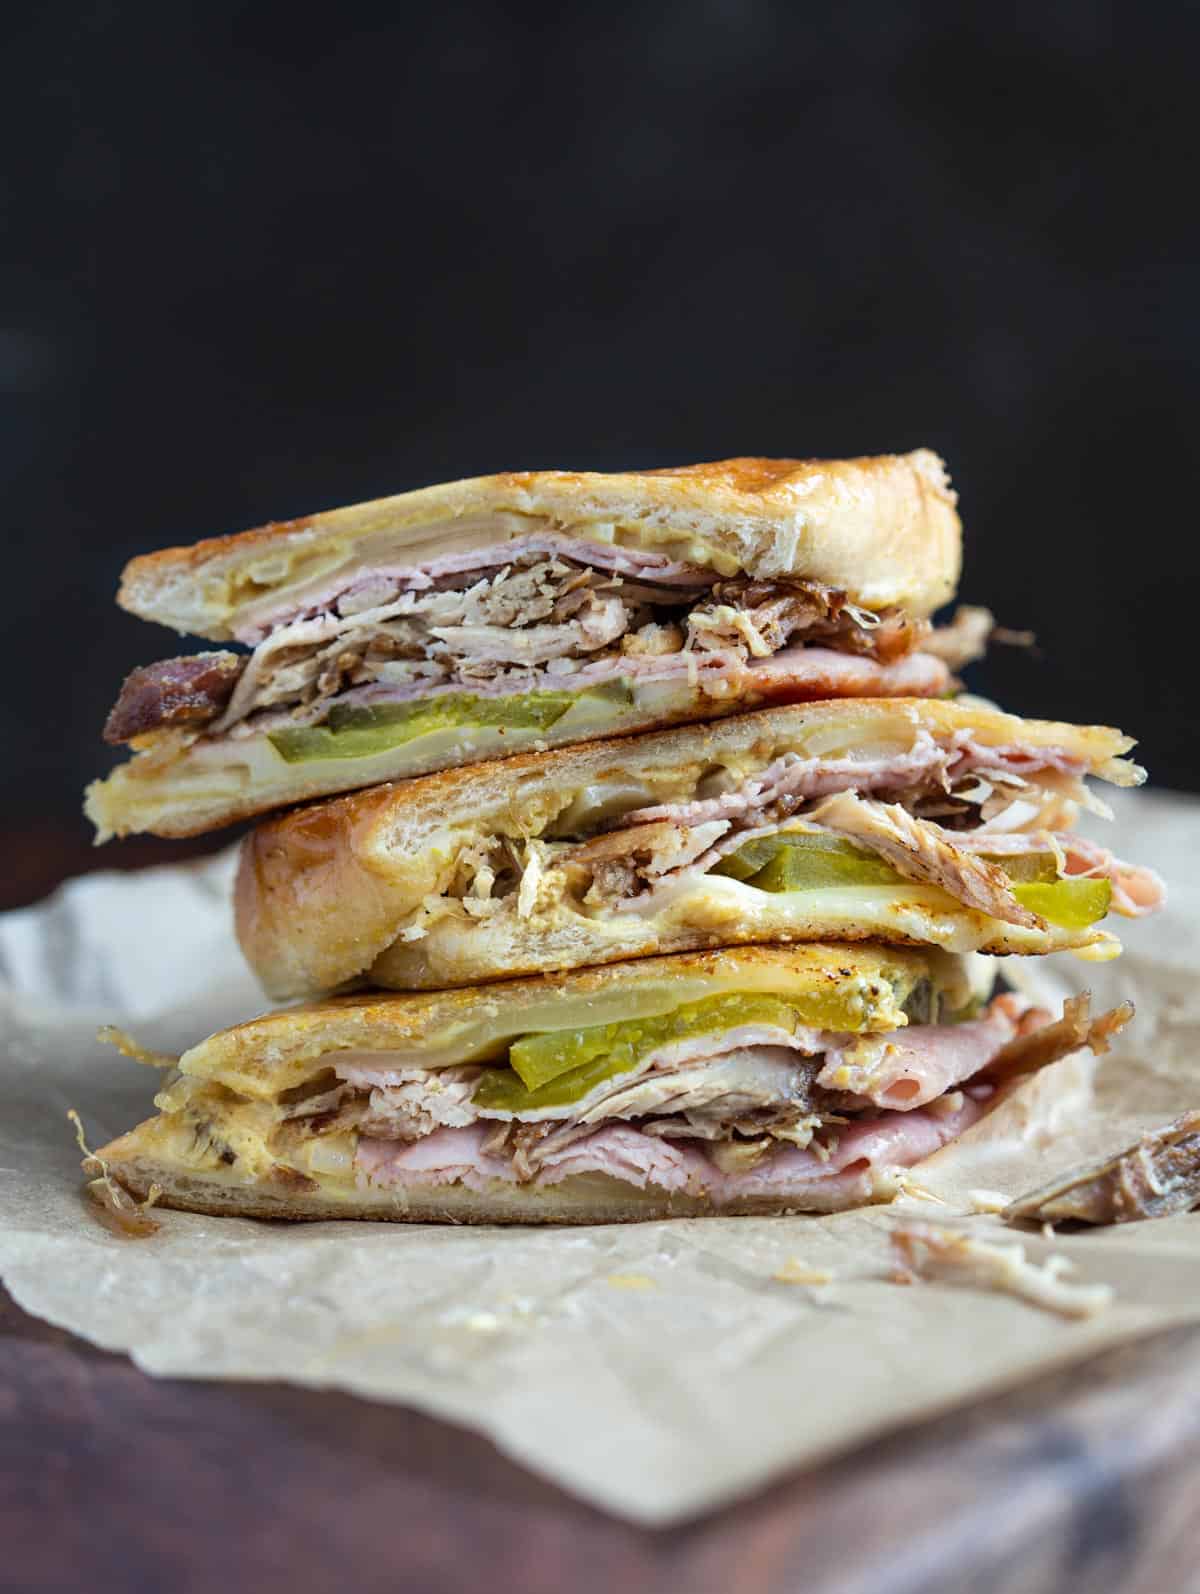 Smoked cuban sandwich recipe stacked on top of each other.